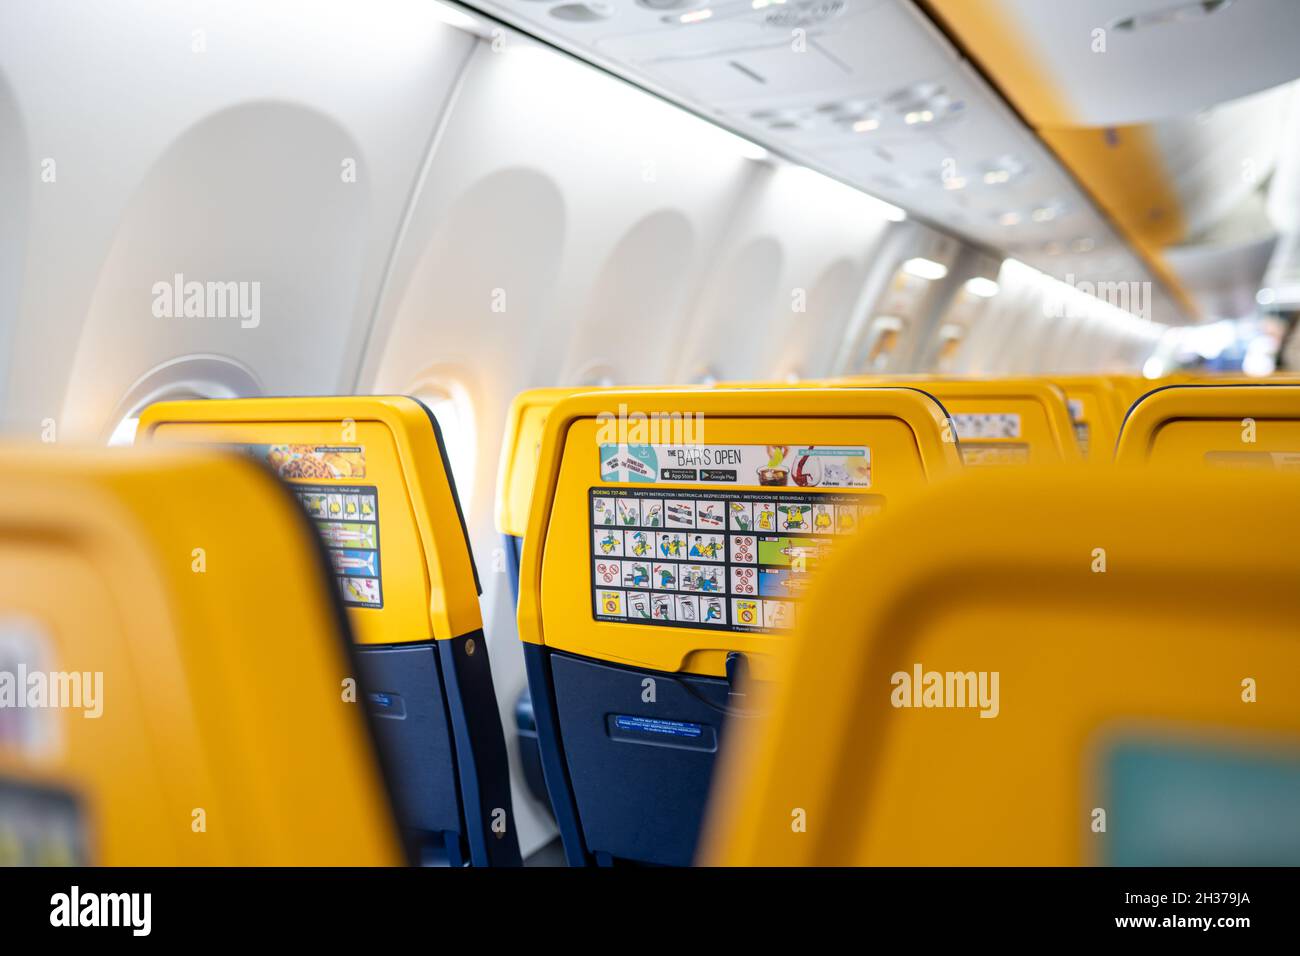 Ryanair empty seats with safety instruction. Airplane interior view. No people, selective focus. Ryanair is an Irish low-cost airline. Birmingham, the UK - October 14, 2021 Stock Photo